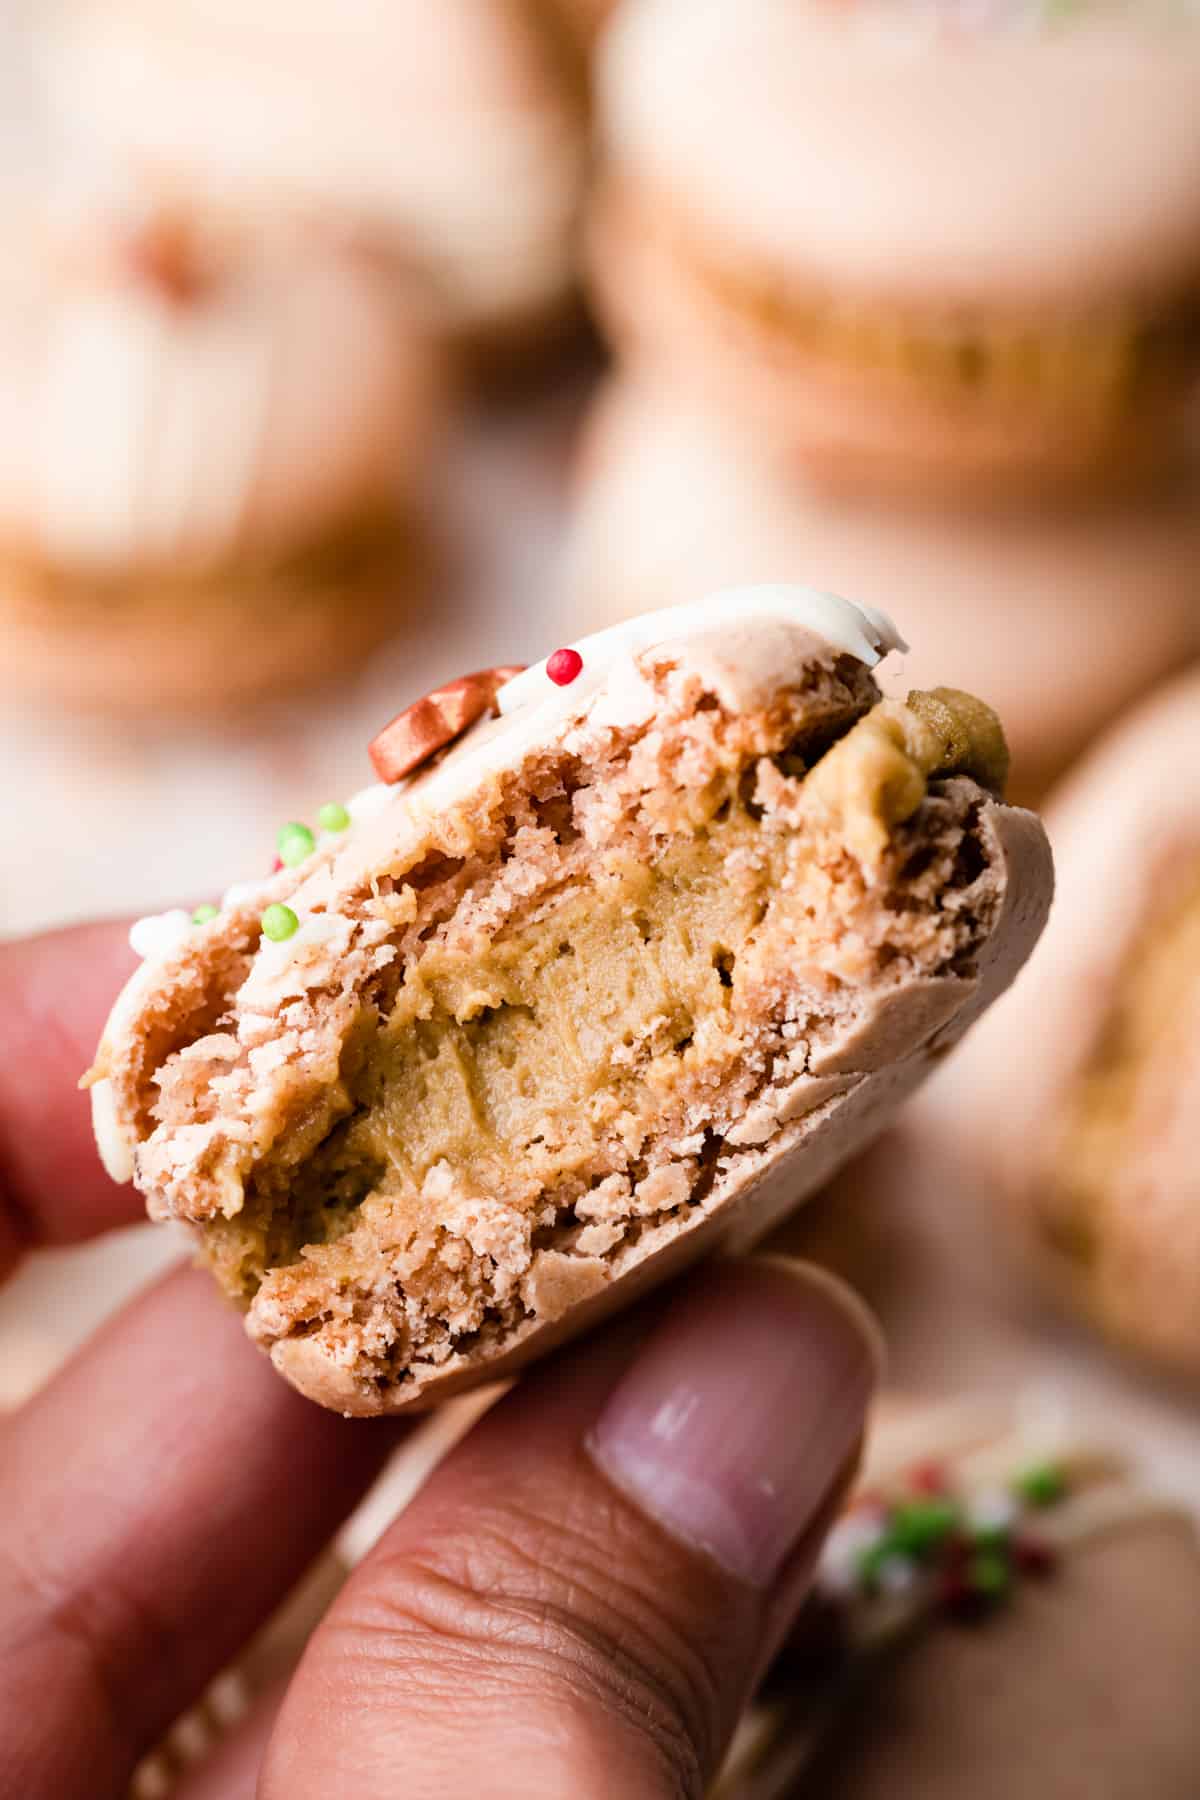 festive macaron with bite taken out of it showing gingerbread buttercream filling.